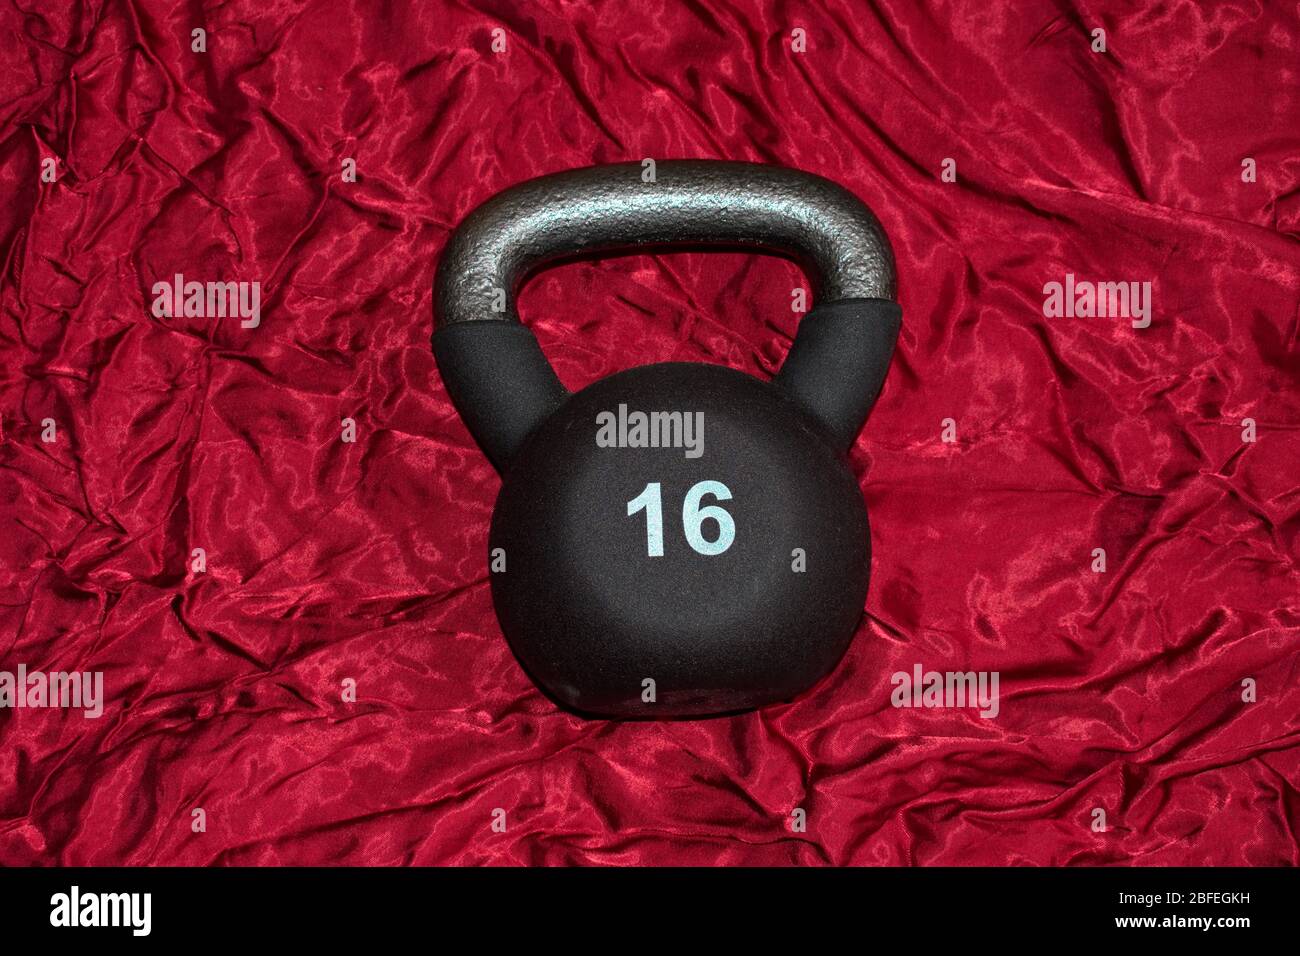 A 16 kg kettlebell is lying on red satin, ready for working out. Stock Photo